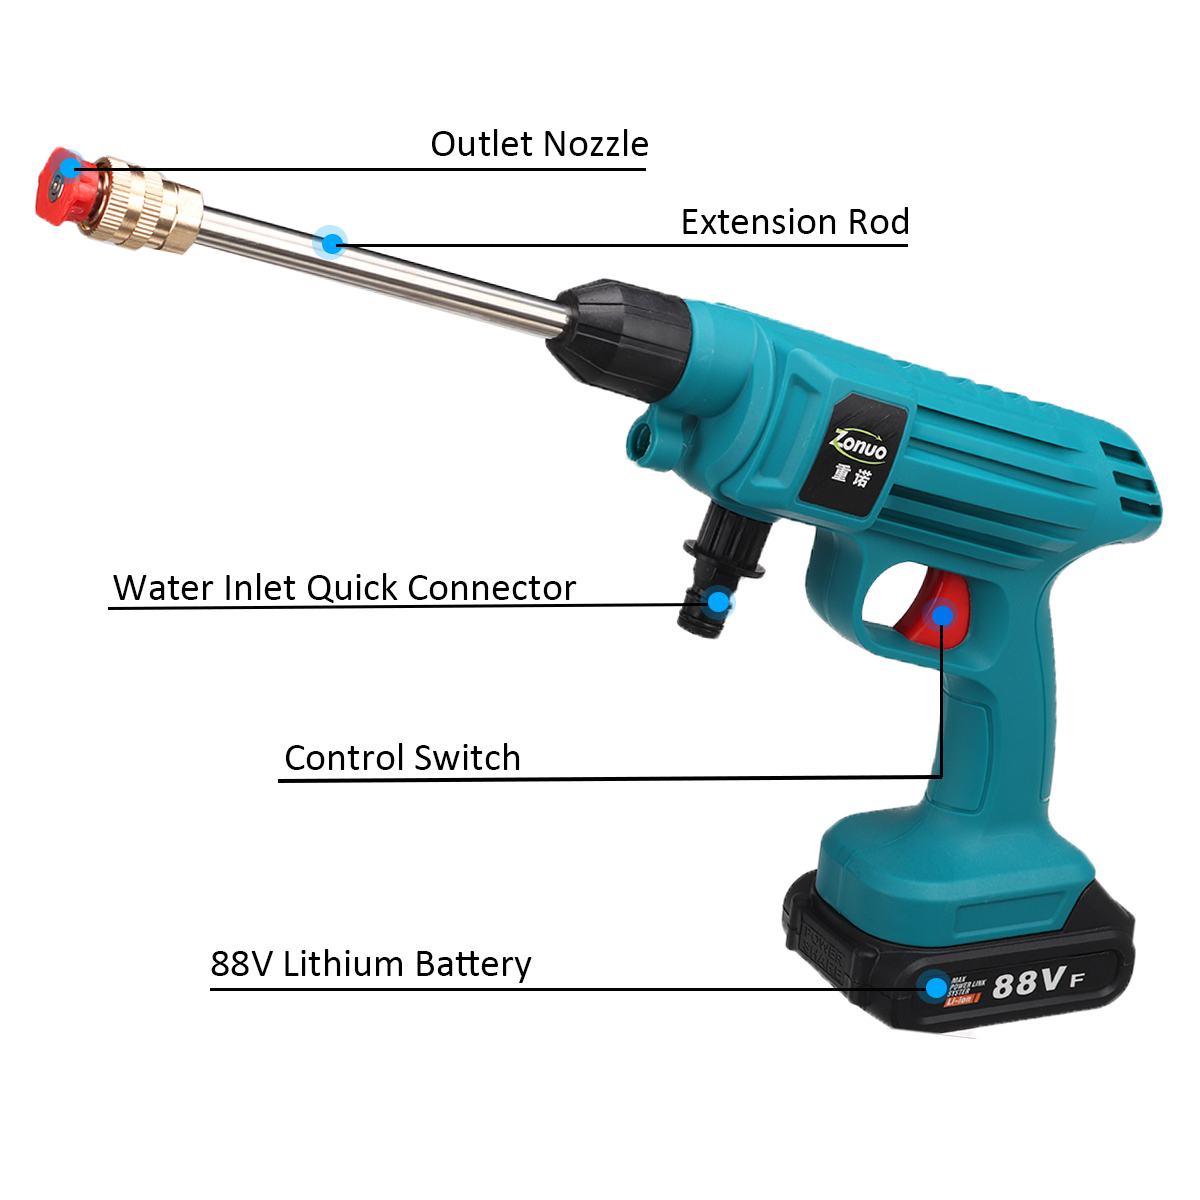 88VF-Cordless-High-Pressure-Washer-Car-Washing-Spray-Guns-Water-Cleaner-W-12-Battery-For-MAKITA-1870563-9